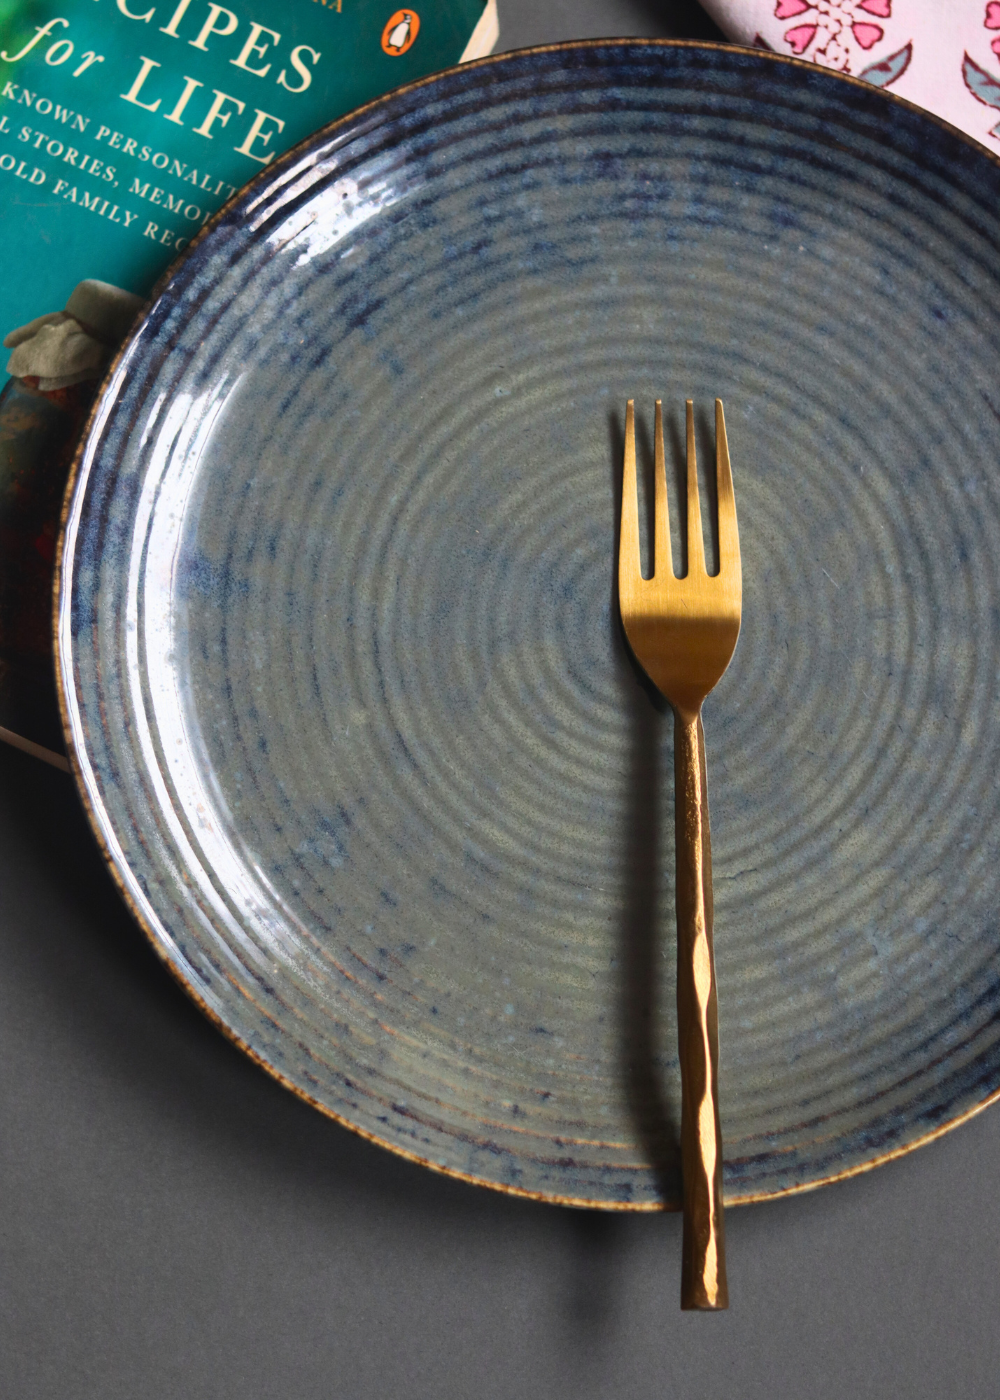 Gold hammered mini fork on plate 